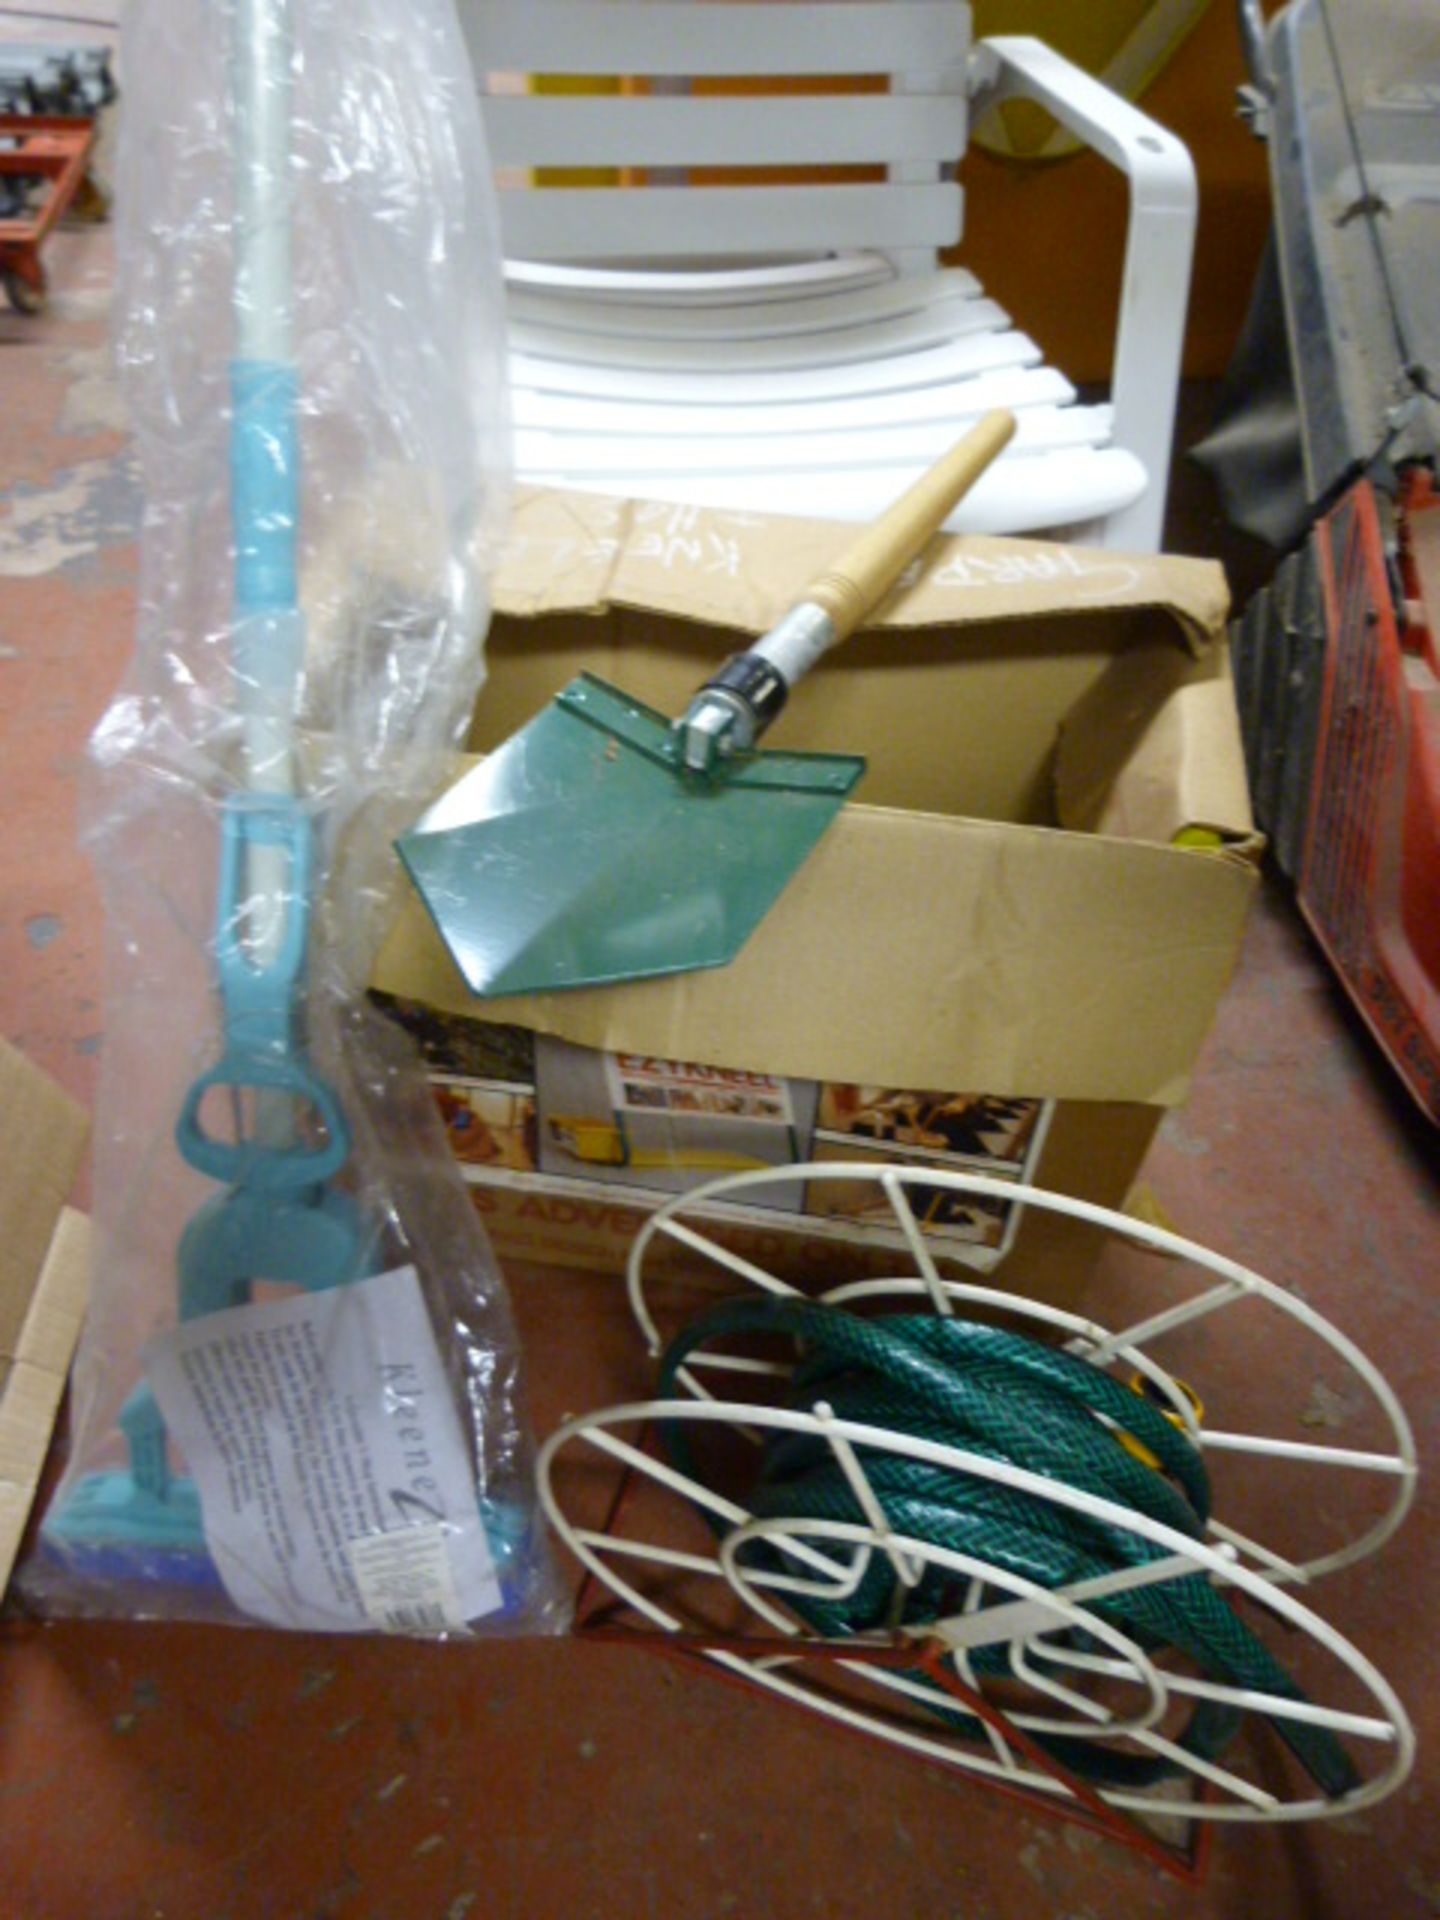 Box Containing Hosepipe, Small Spade and a Mop